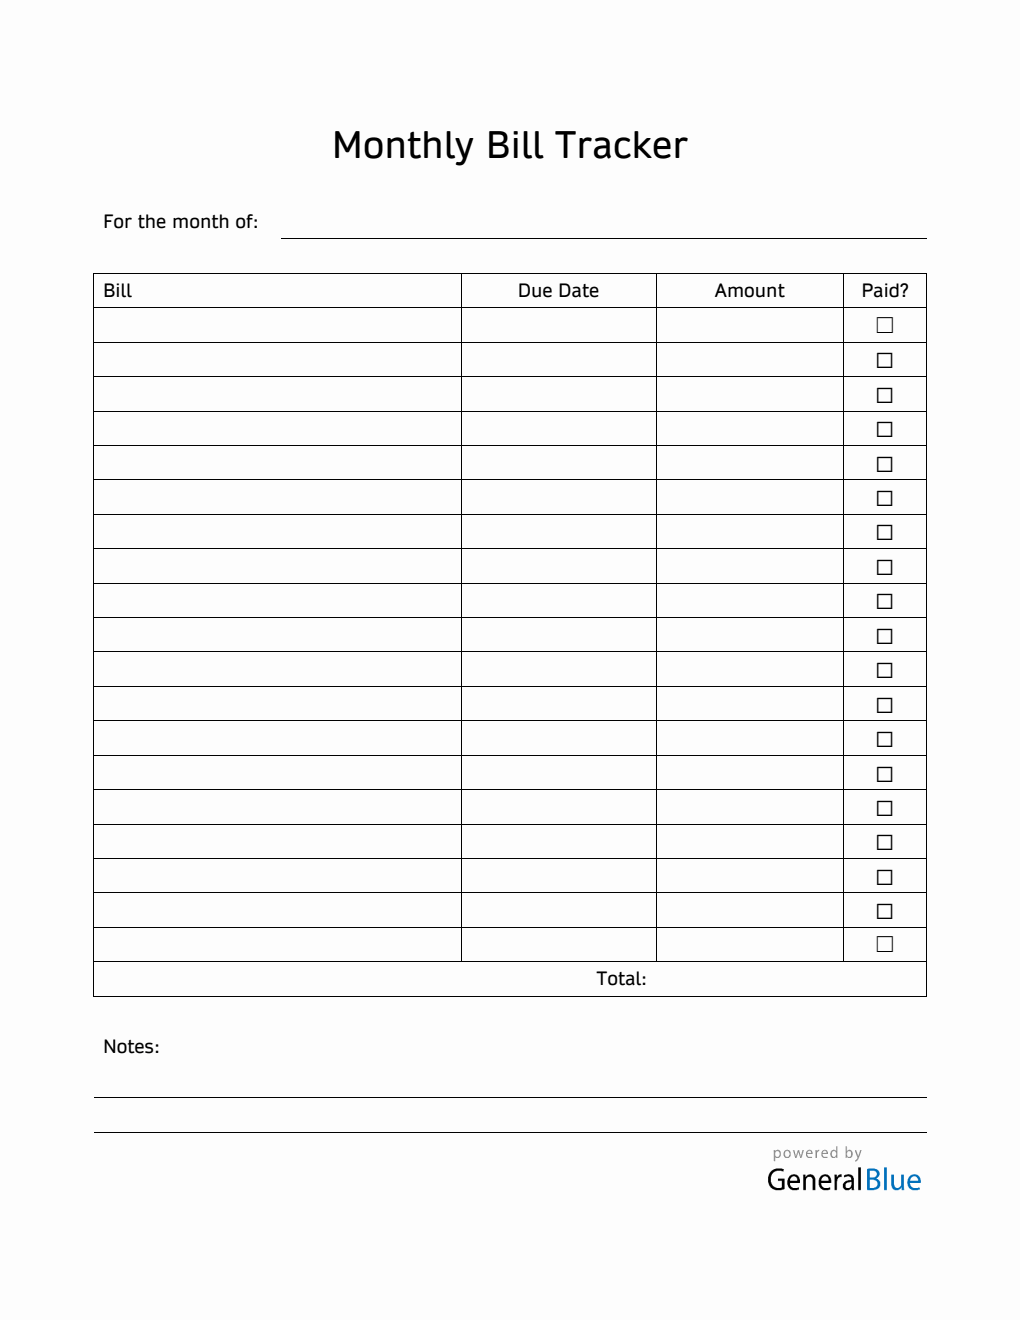 monthly-bill-tracker-in-word-printable